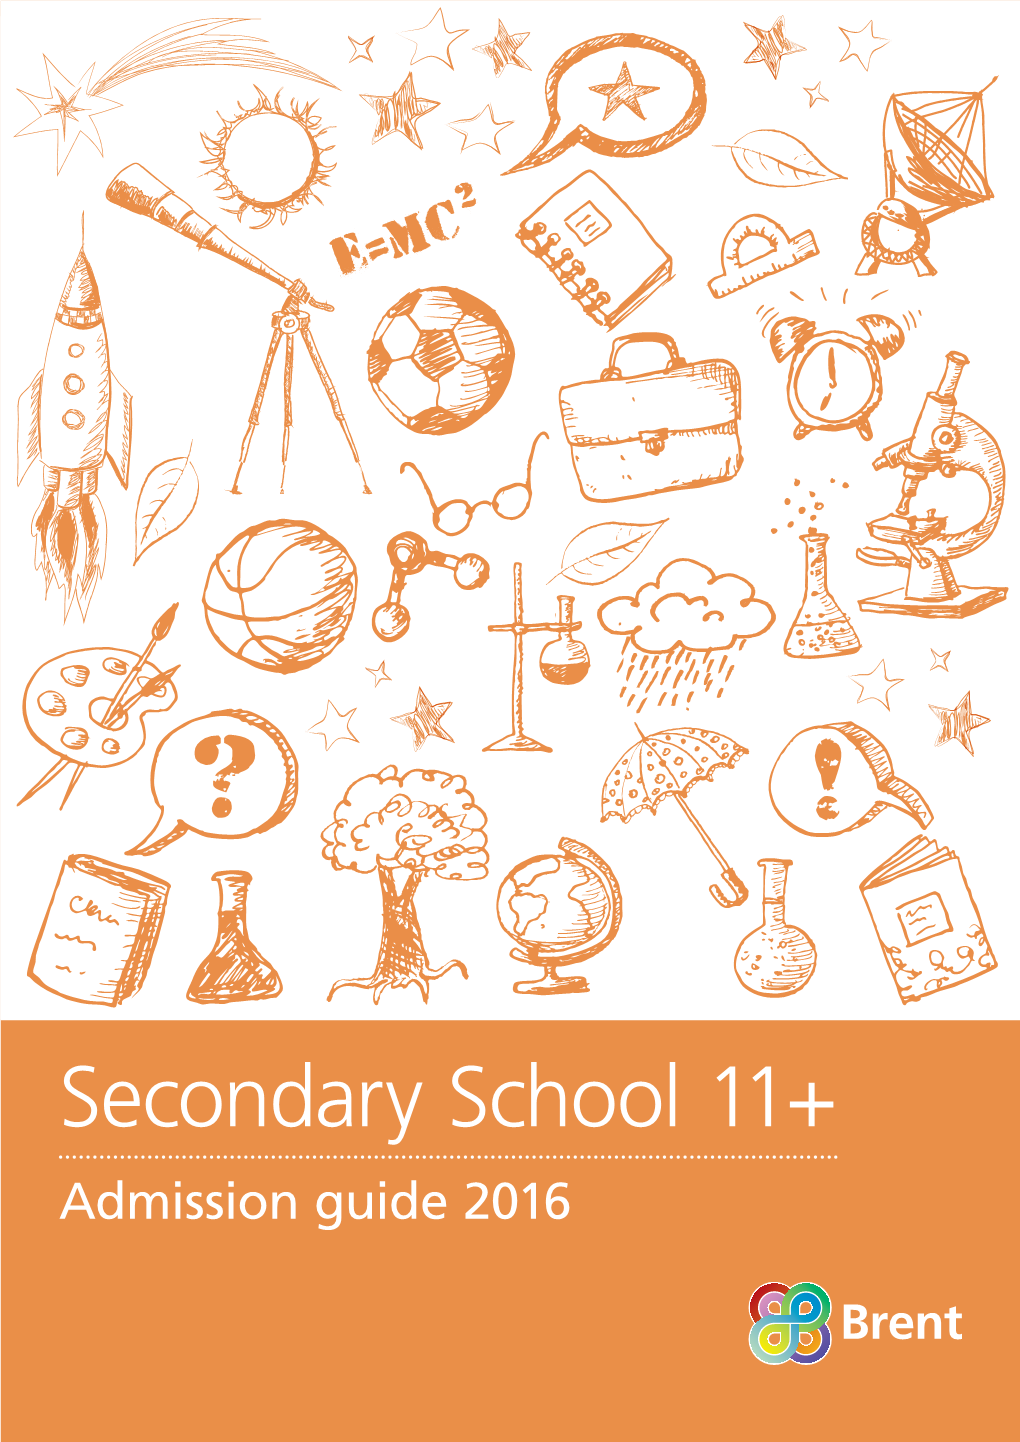 Brent Secondary School Admission Guide 2016